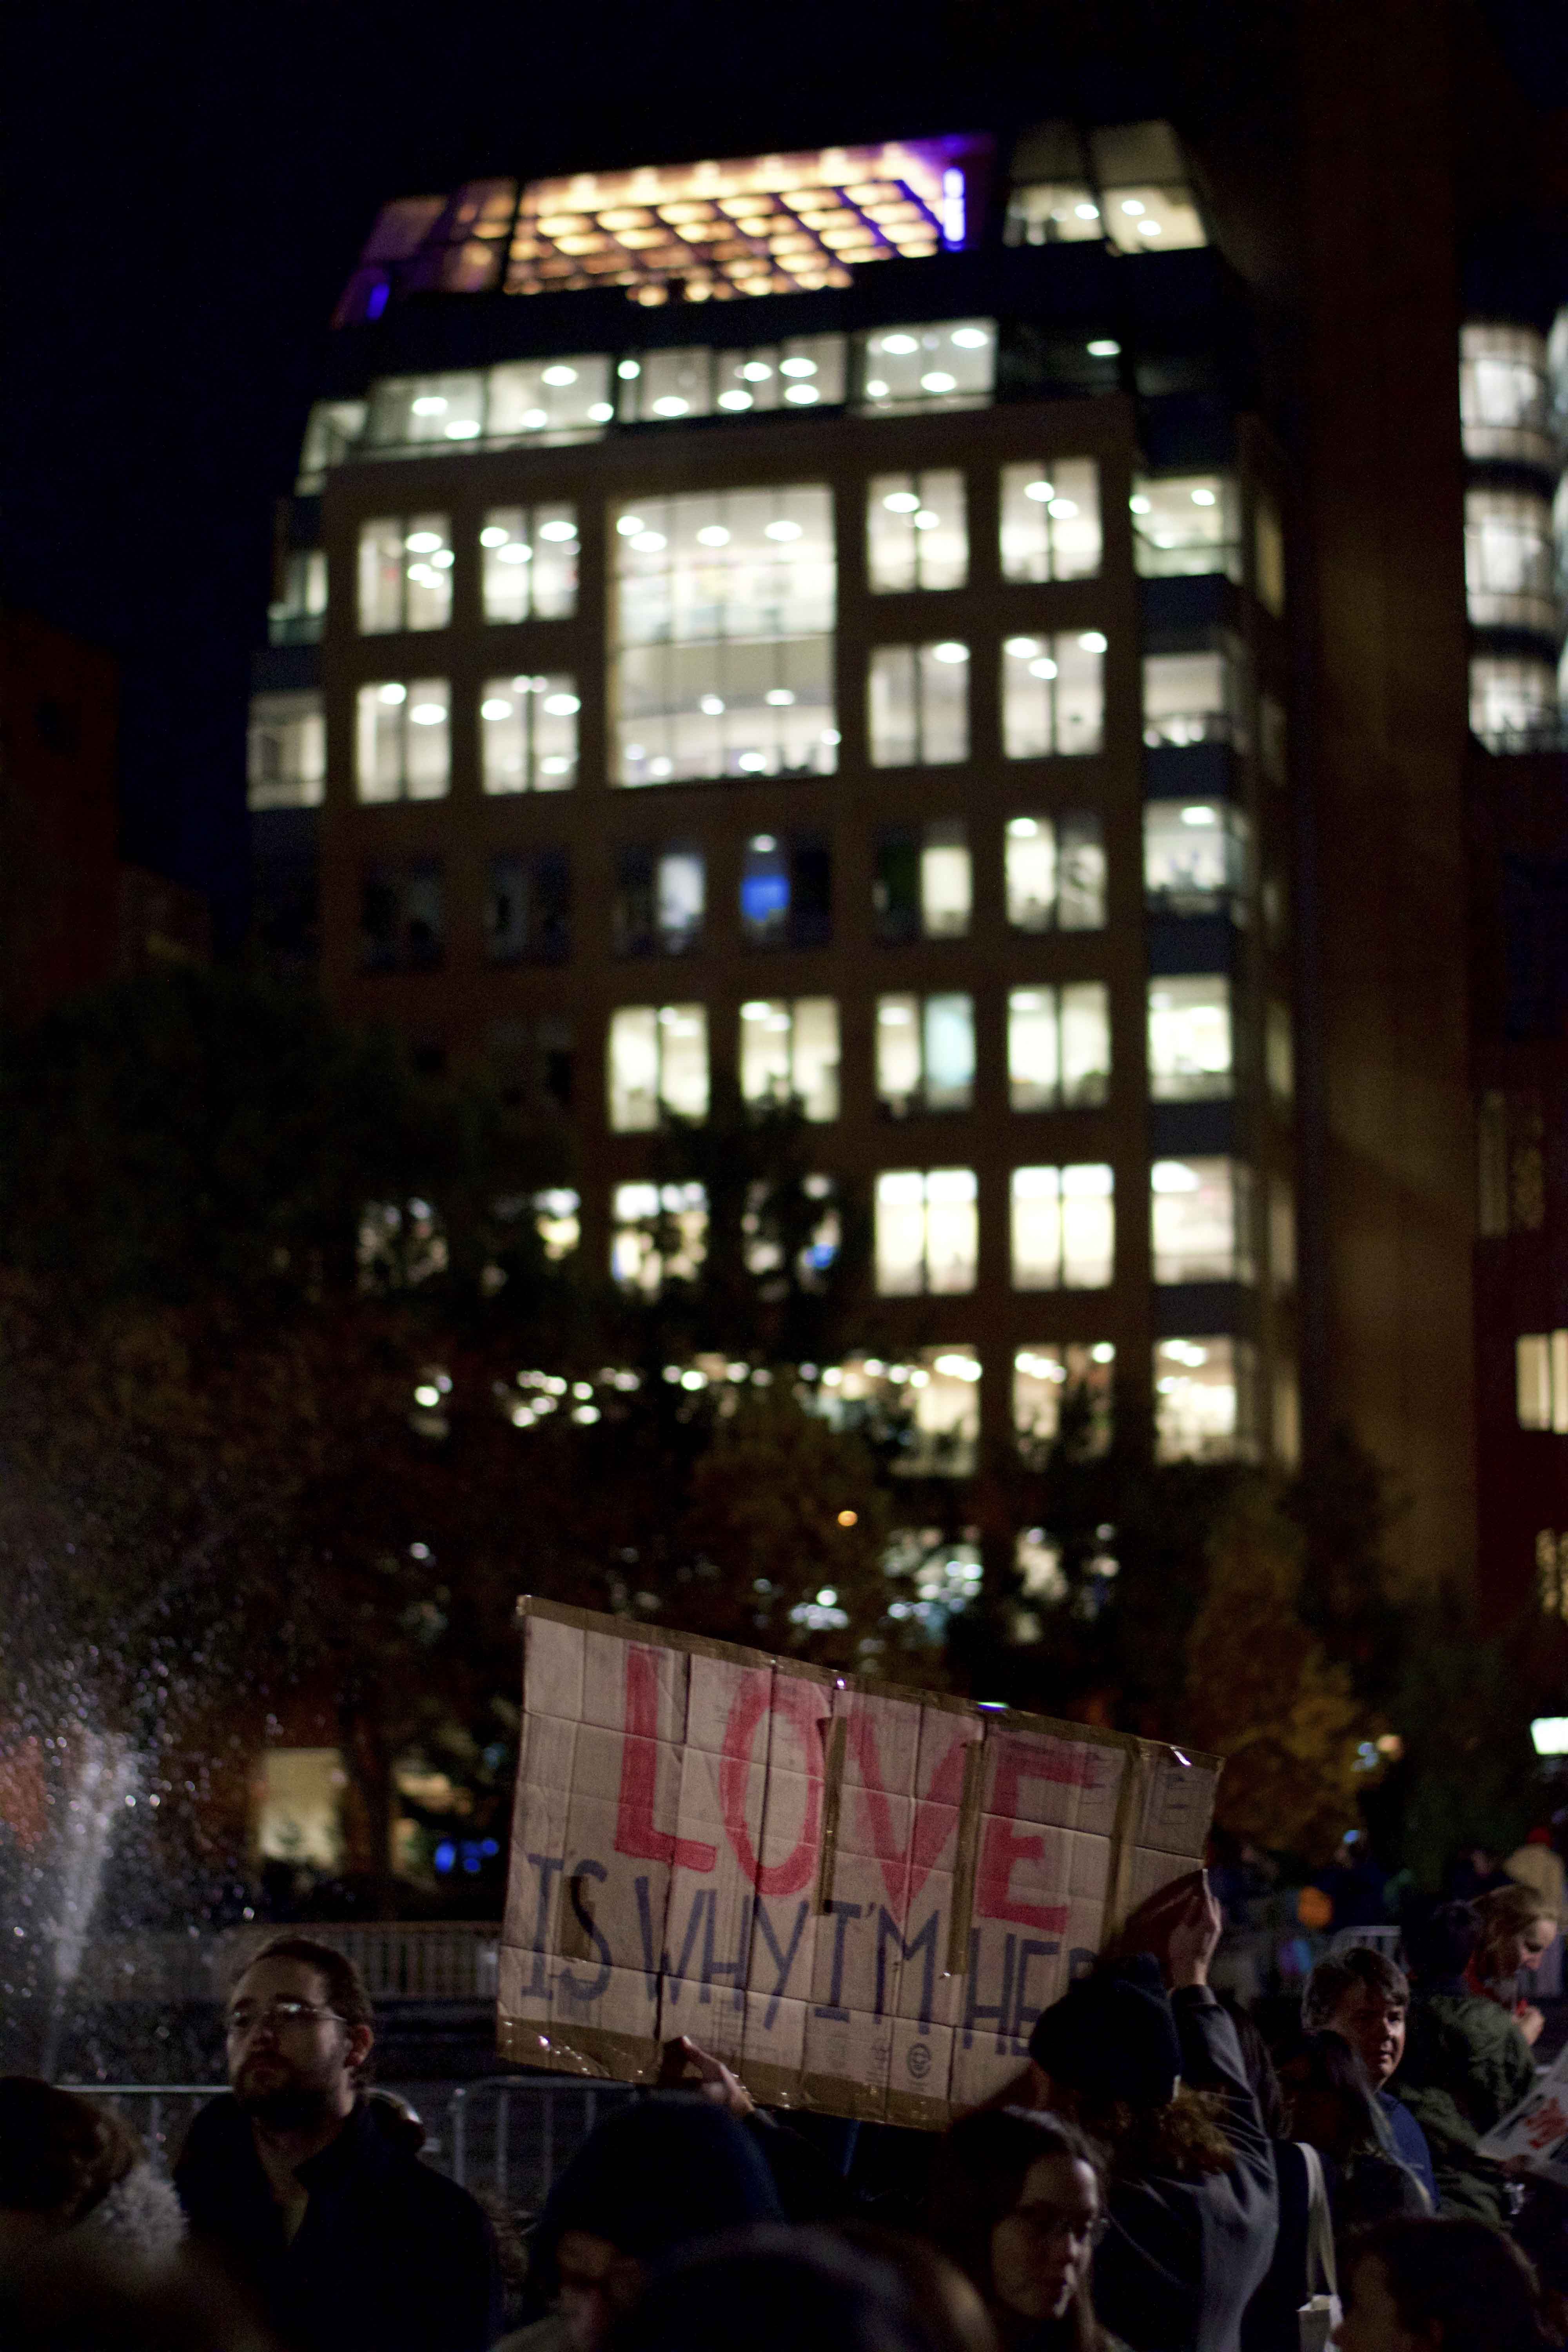 NYU+Student+Organizes+Love+Rally+in+the+Park